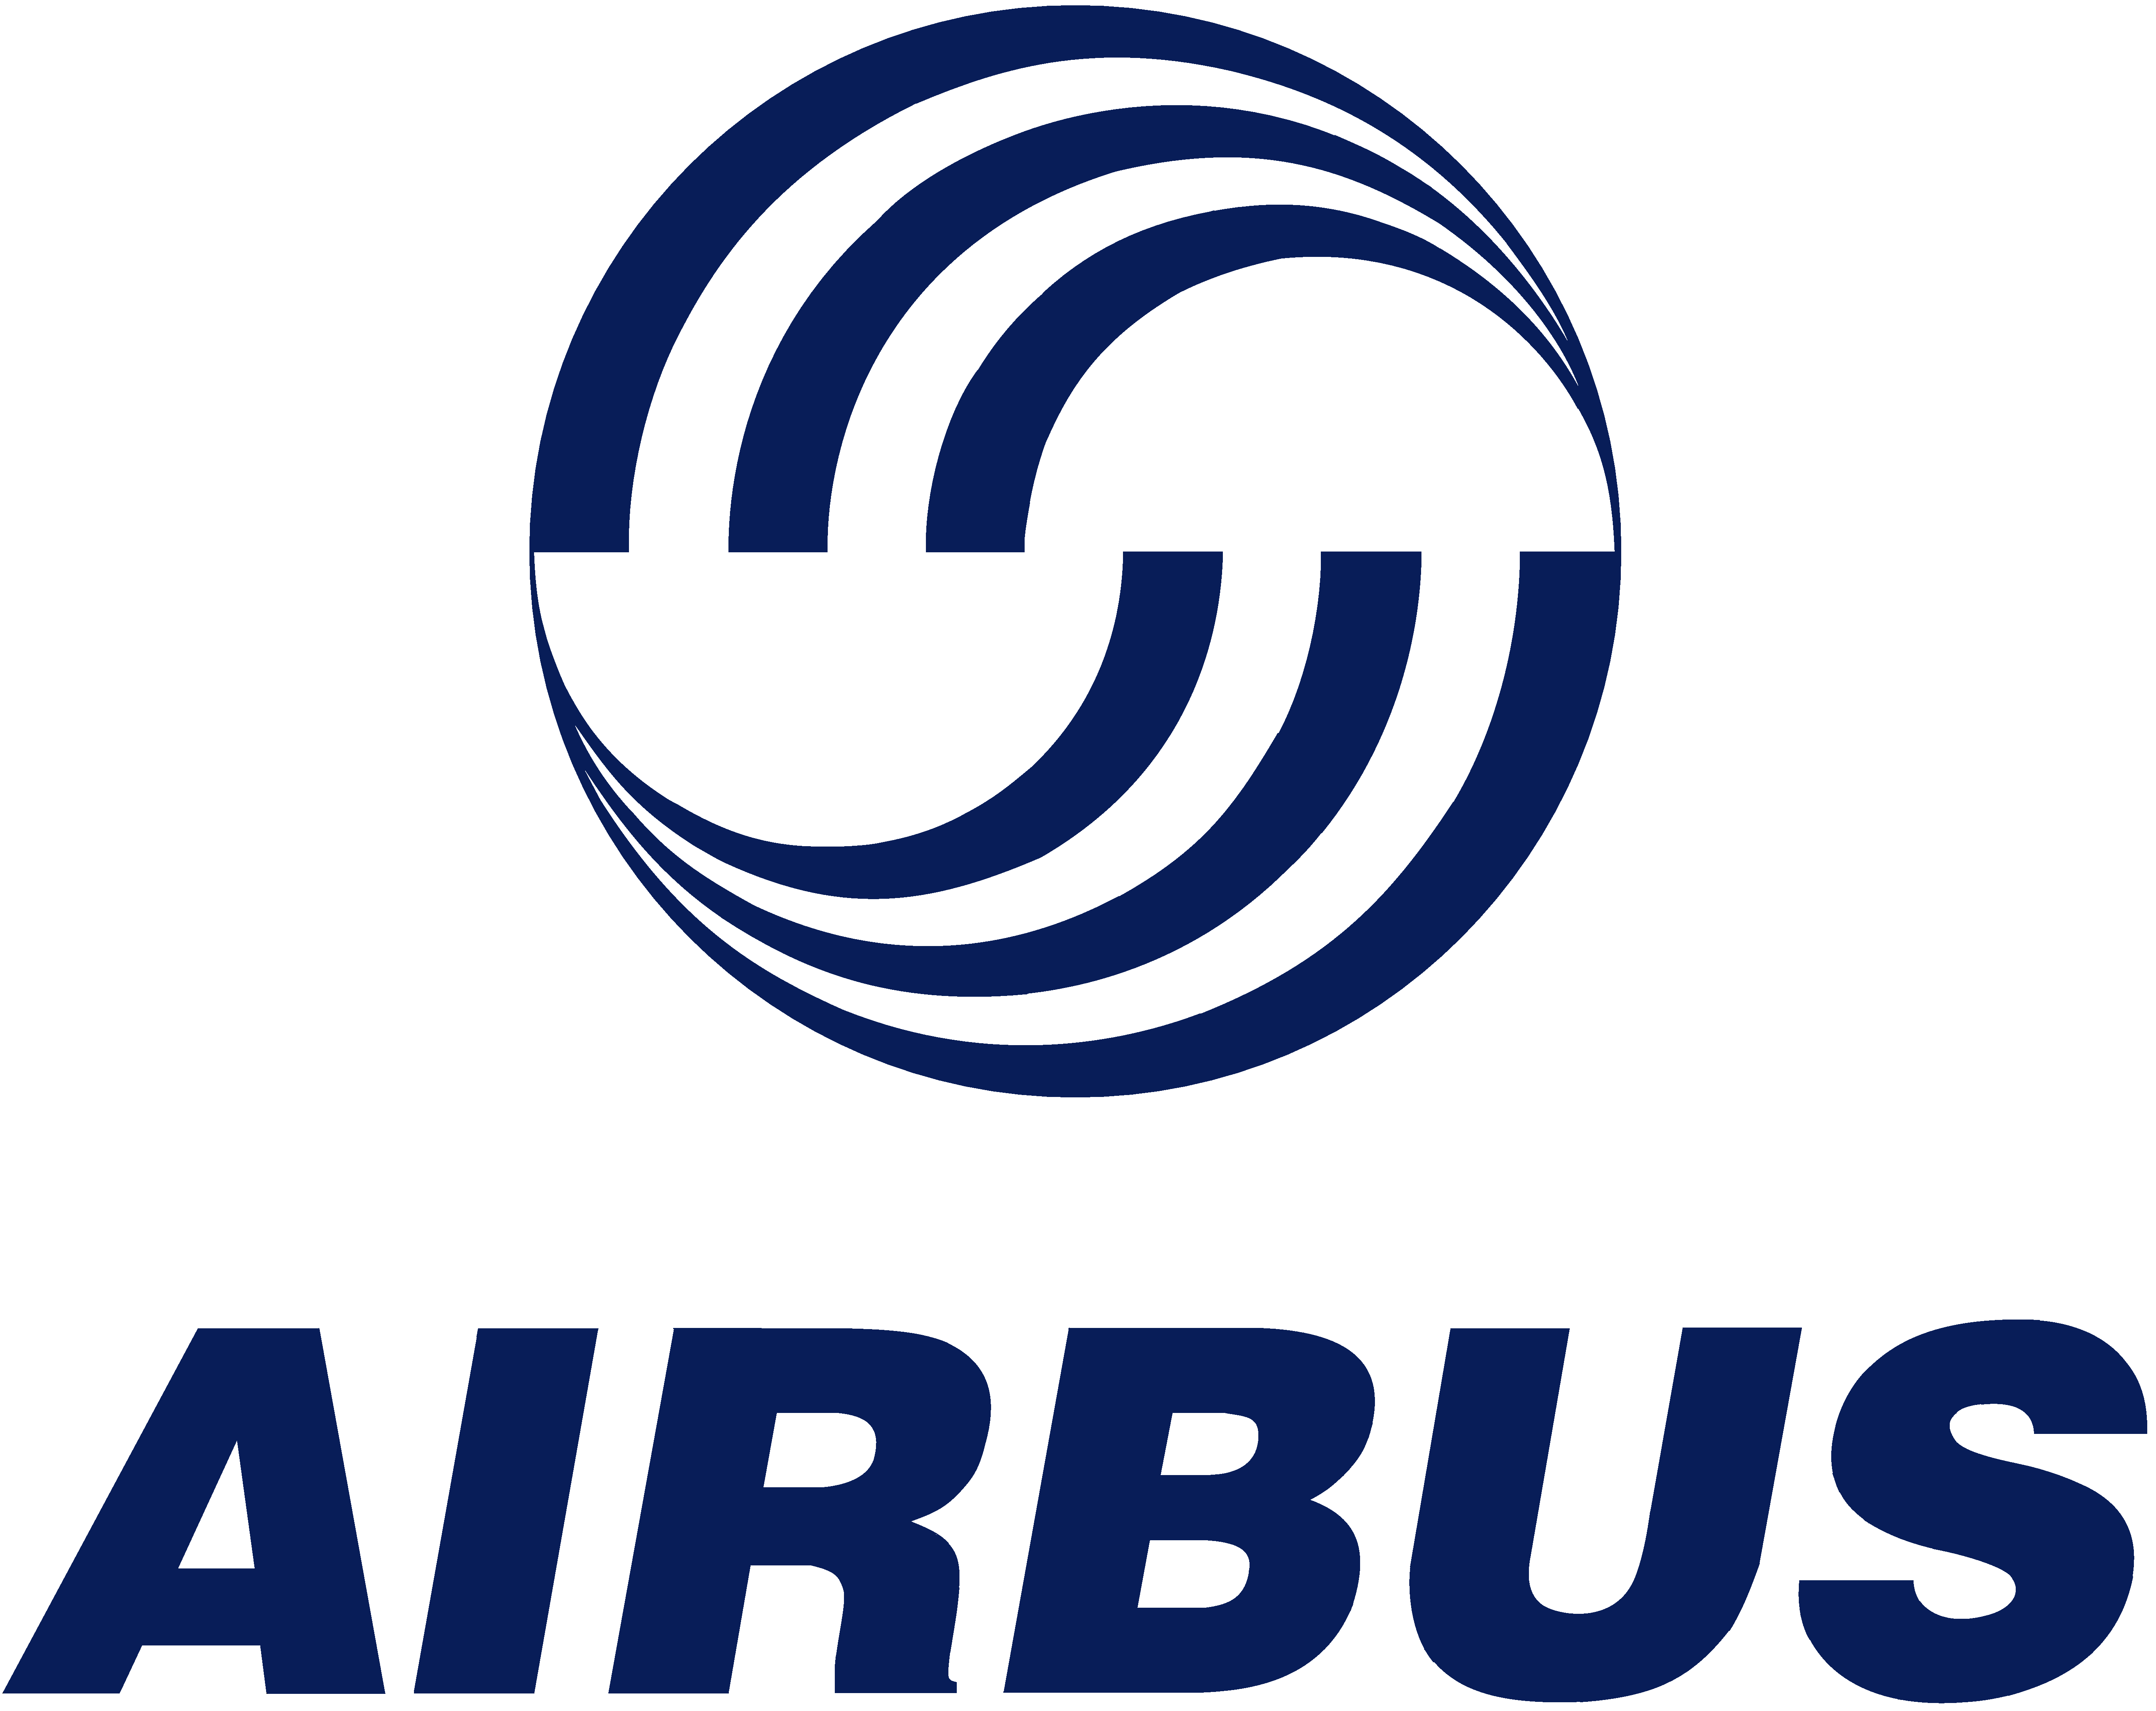 Airbus is a leading aircraft 